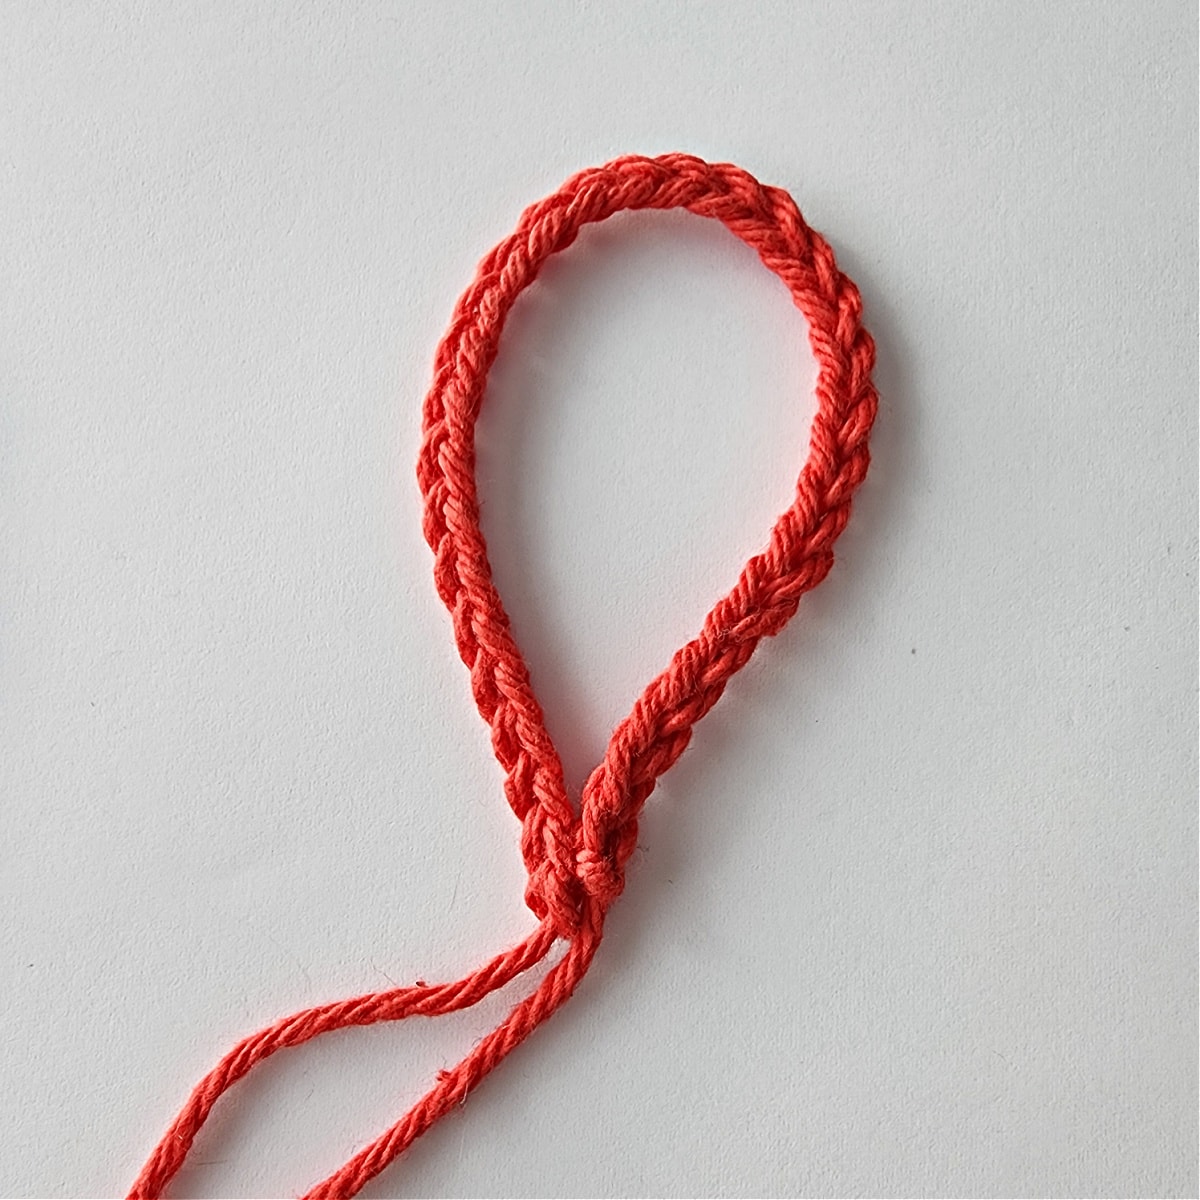 crochet chain hanging loop for ornament